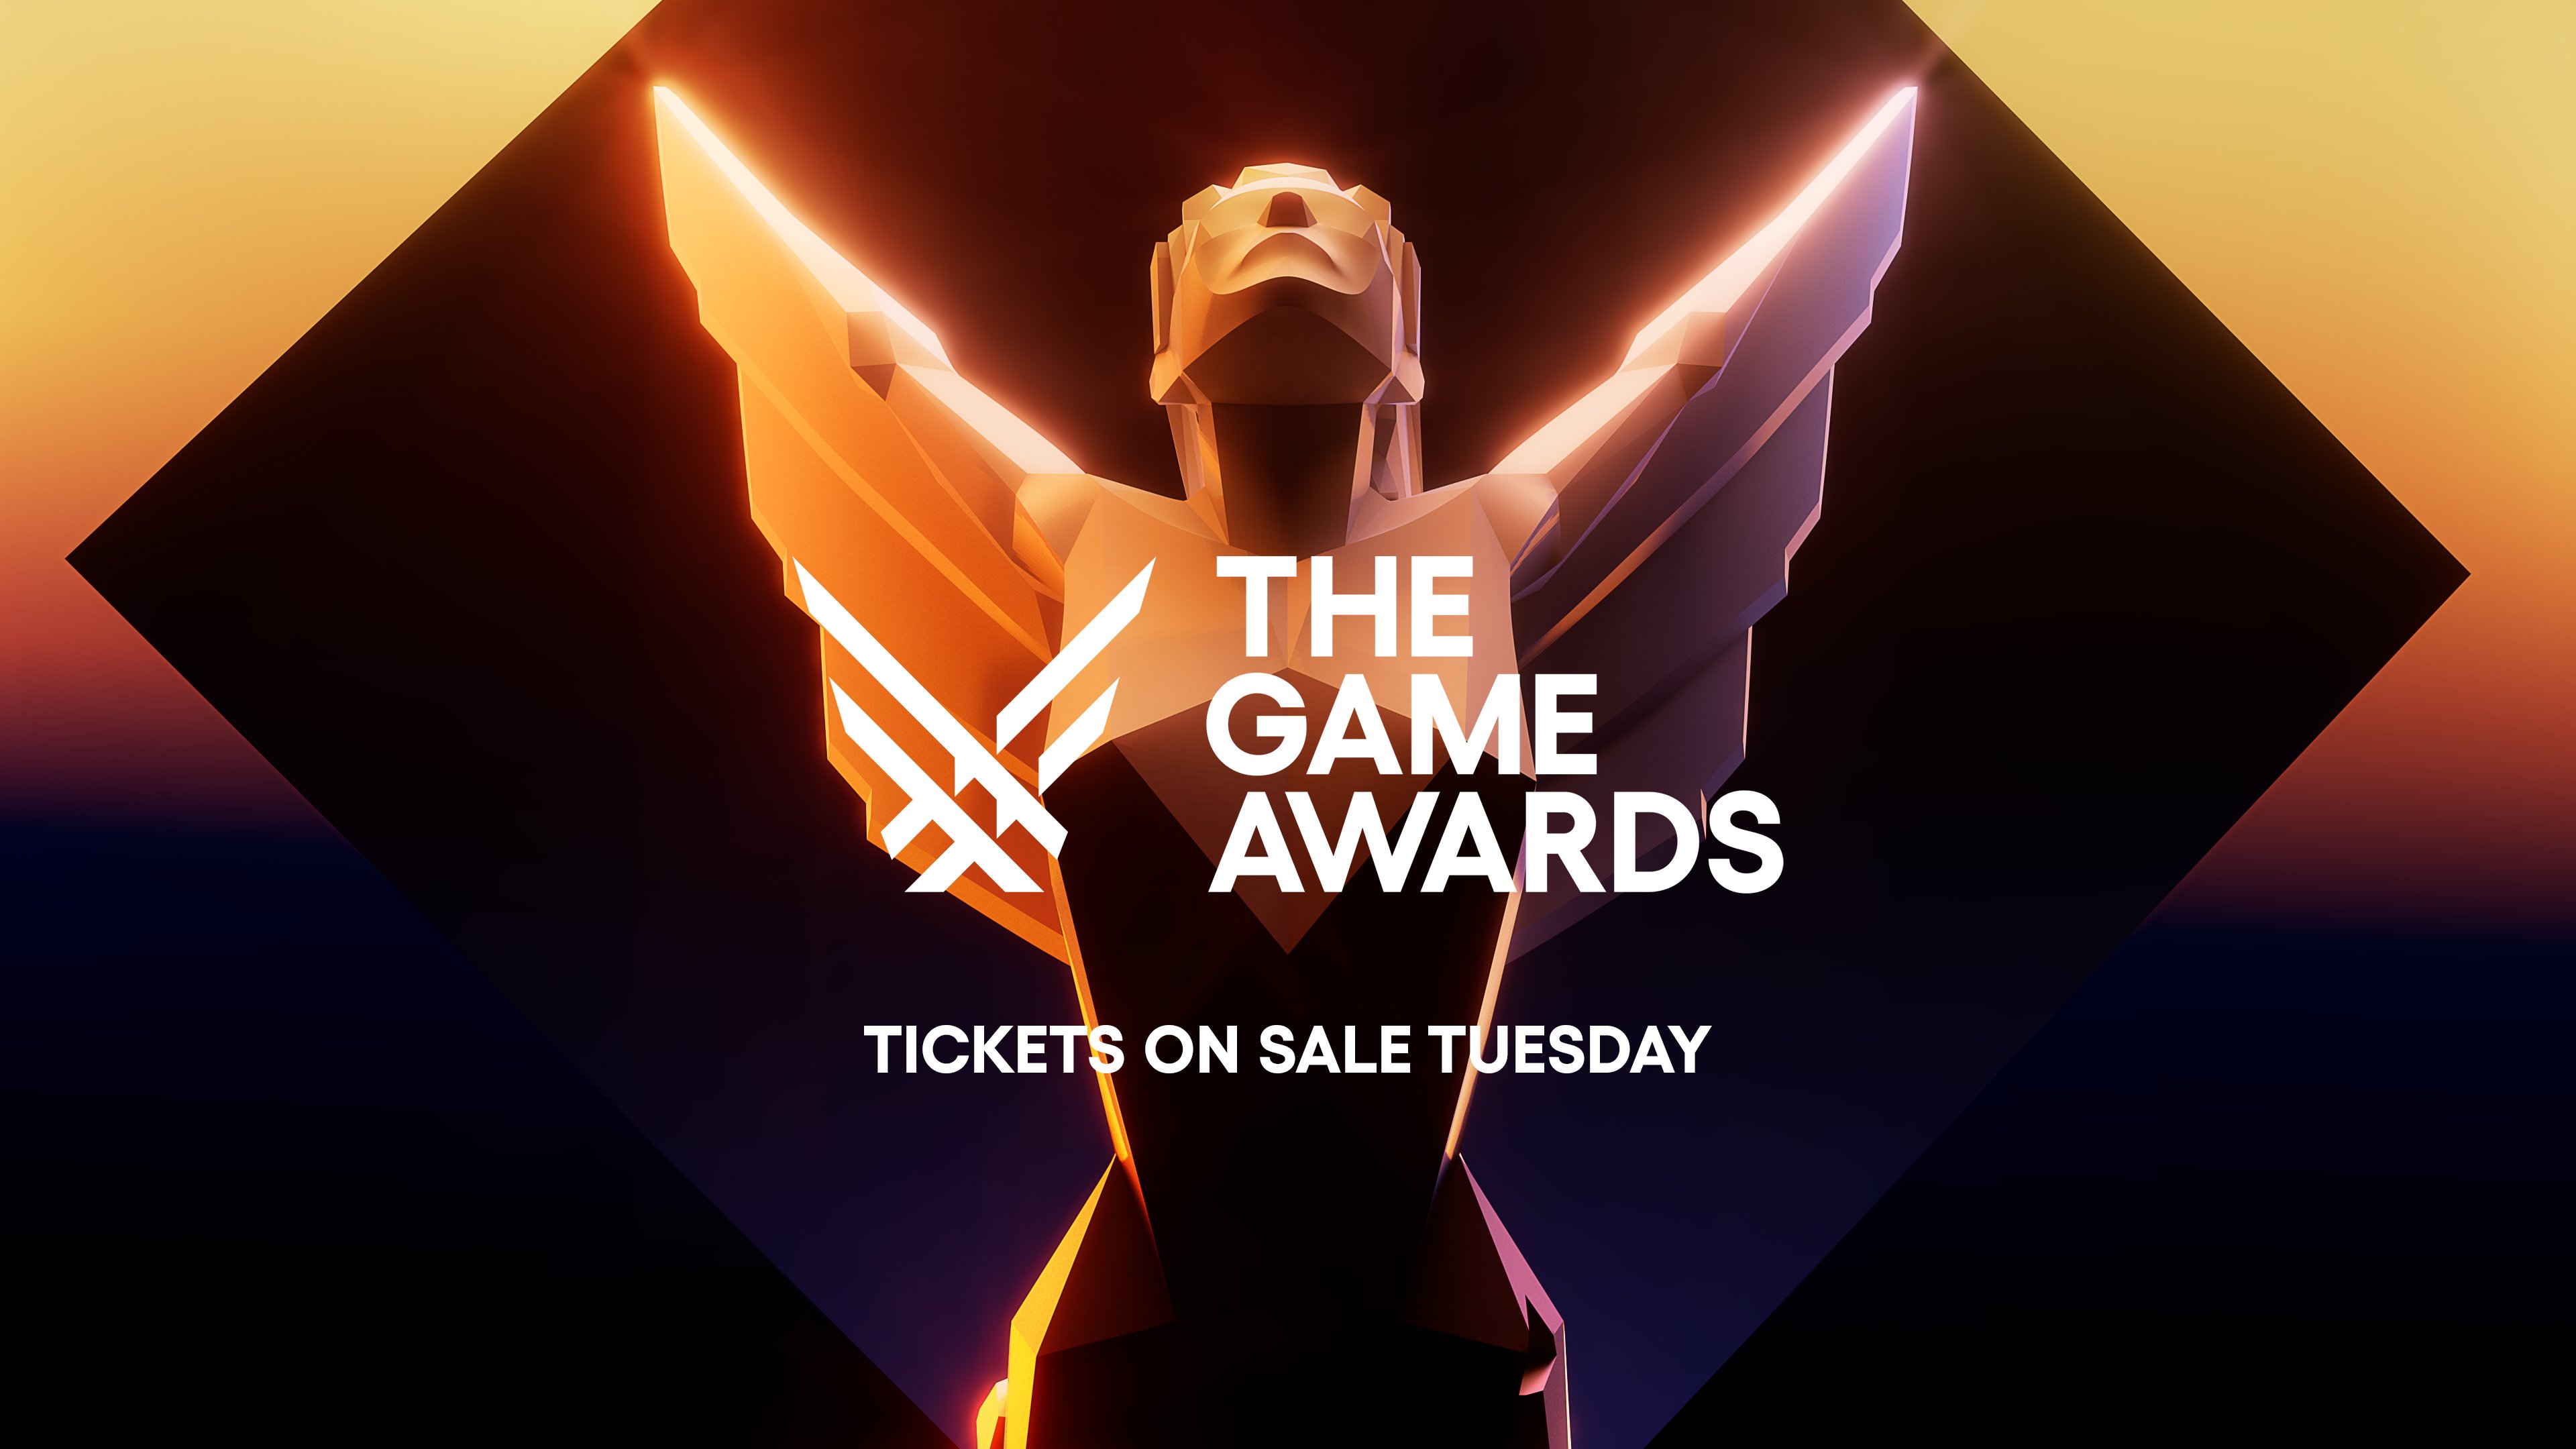 The Game Awards 2017 Announced, Tickets On Sale Now